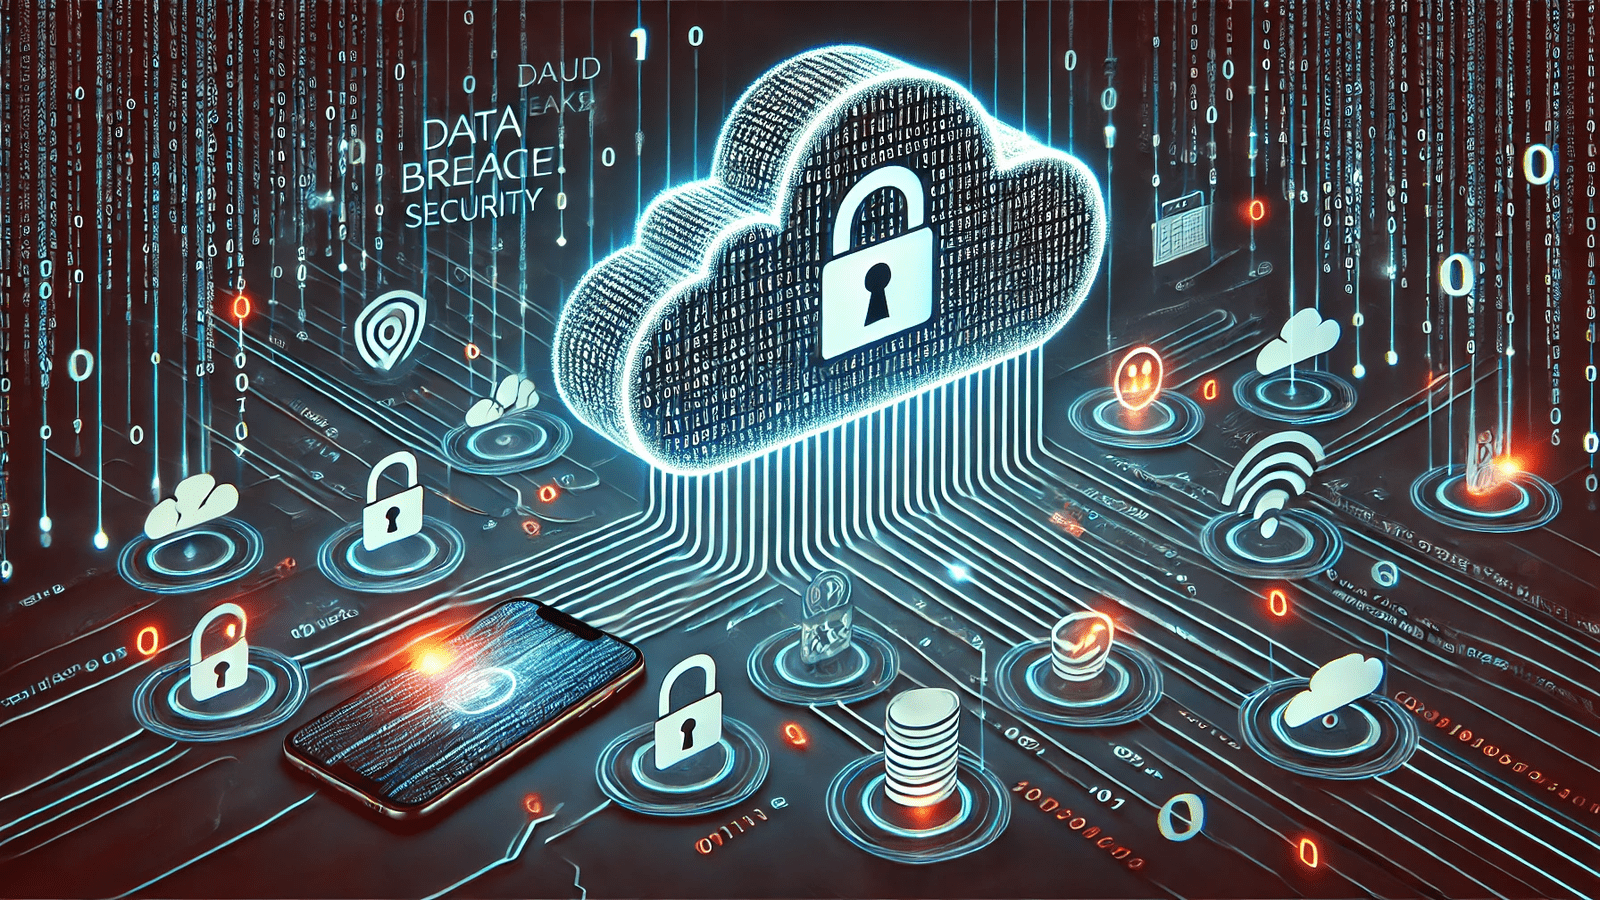 Digital illustration showing a cloud with binary code and data streams, warning symbols, lock icons, smartphones, and visible data leaks, representing a data breach in cloud security.